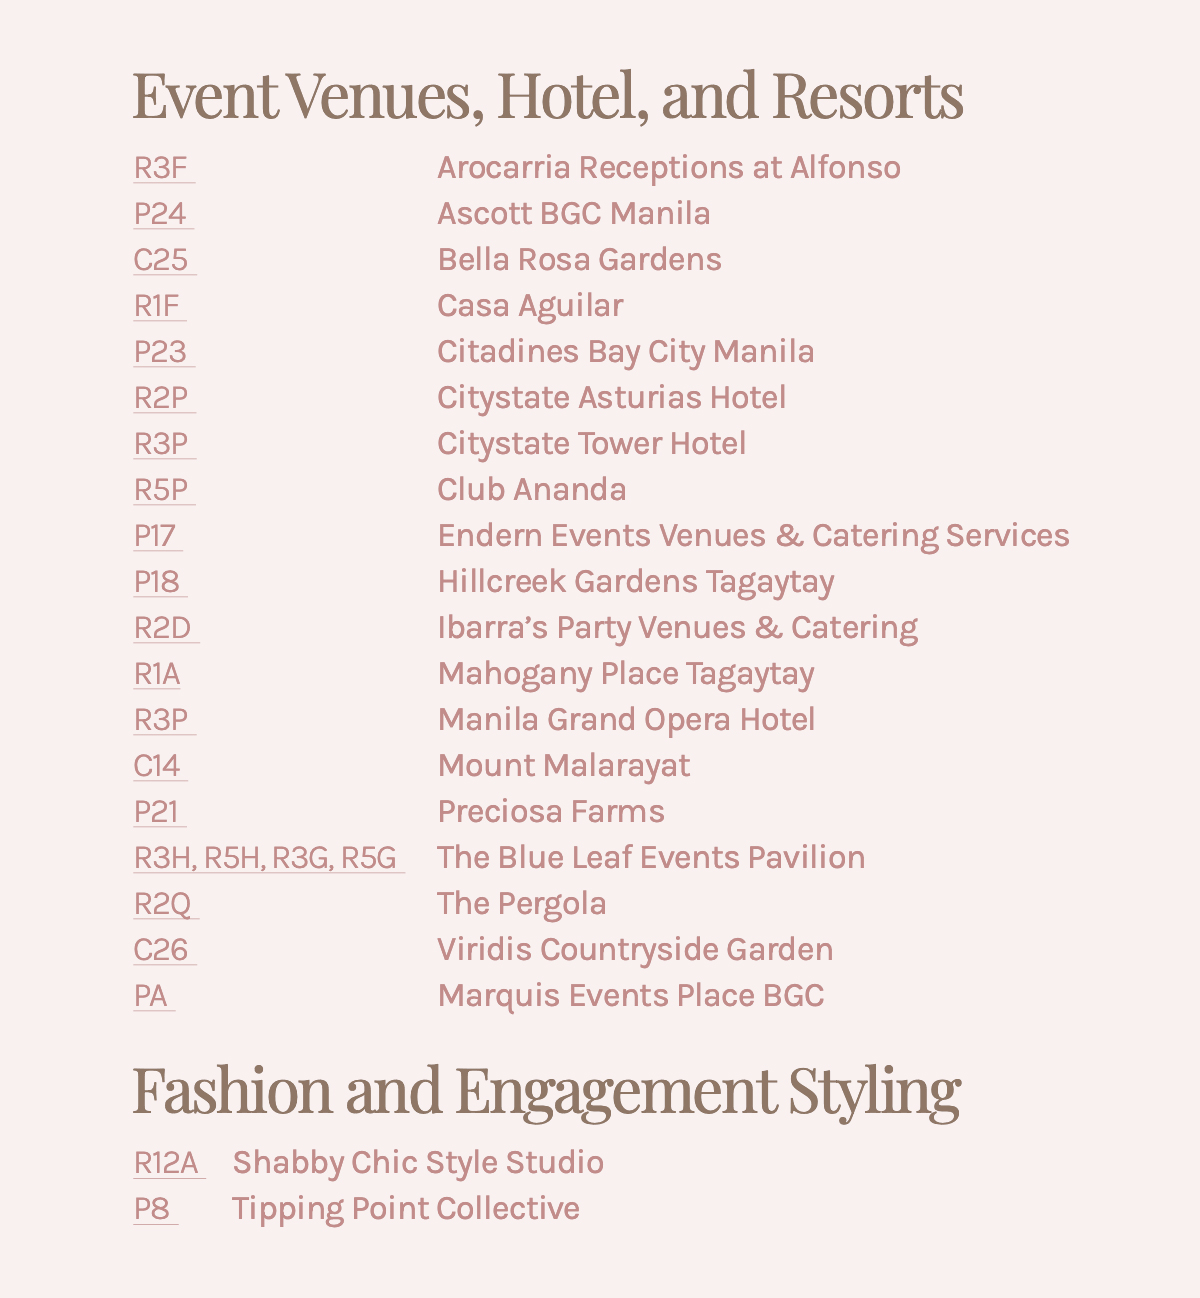 Event Venues, Hotel, and Resorts R3F Arocarria Receptions at Alfonso P24 Ascott BGC Manila C25 Bella Rosa Gardens R1F Casa Aguilar P23 Citadines Bay City Manila R2P Citystate Asturias Hotel R3P Citystate Tower Hotel R5P Club Ananda P17 Endern Events Venues & Catering Services P18 Hillcreek Gardens Tagaytay R2D Ibarra's Party Venues & Catering R1A Mahogany Place Tagaytay R3P Manila Grand Opera Hotel C14 Mount Malarayat P21 Preciosa Farms R3H, R5H, R3G, R5G The Blue Leaf Events Pavilion R2Q The Pergola C26 Viridis Countryside Garden PA Marquis Events Place BGC Fashion and Engagement Styling R12A Shabby Chic Style Studio P8 Tipping Point Collective